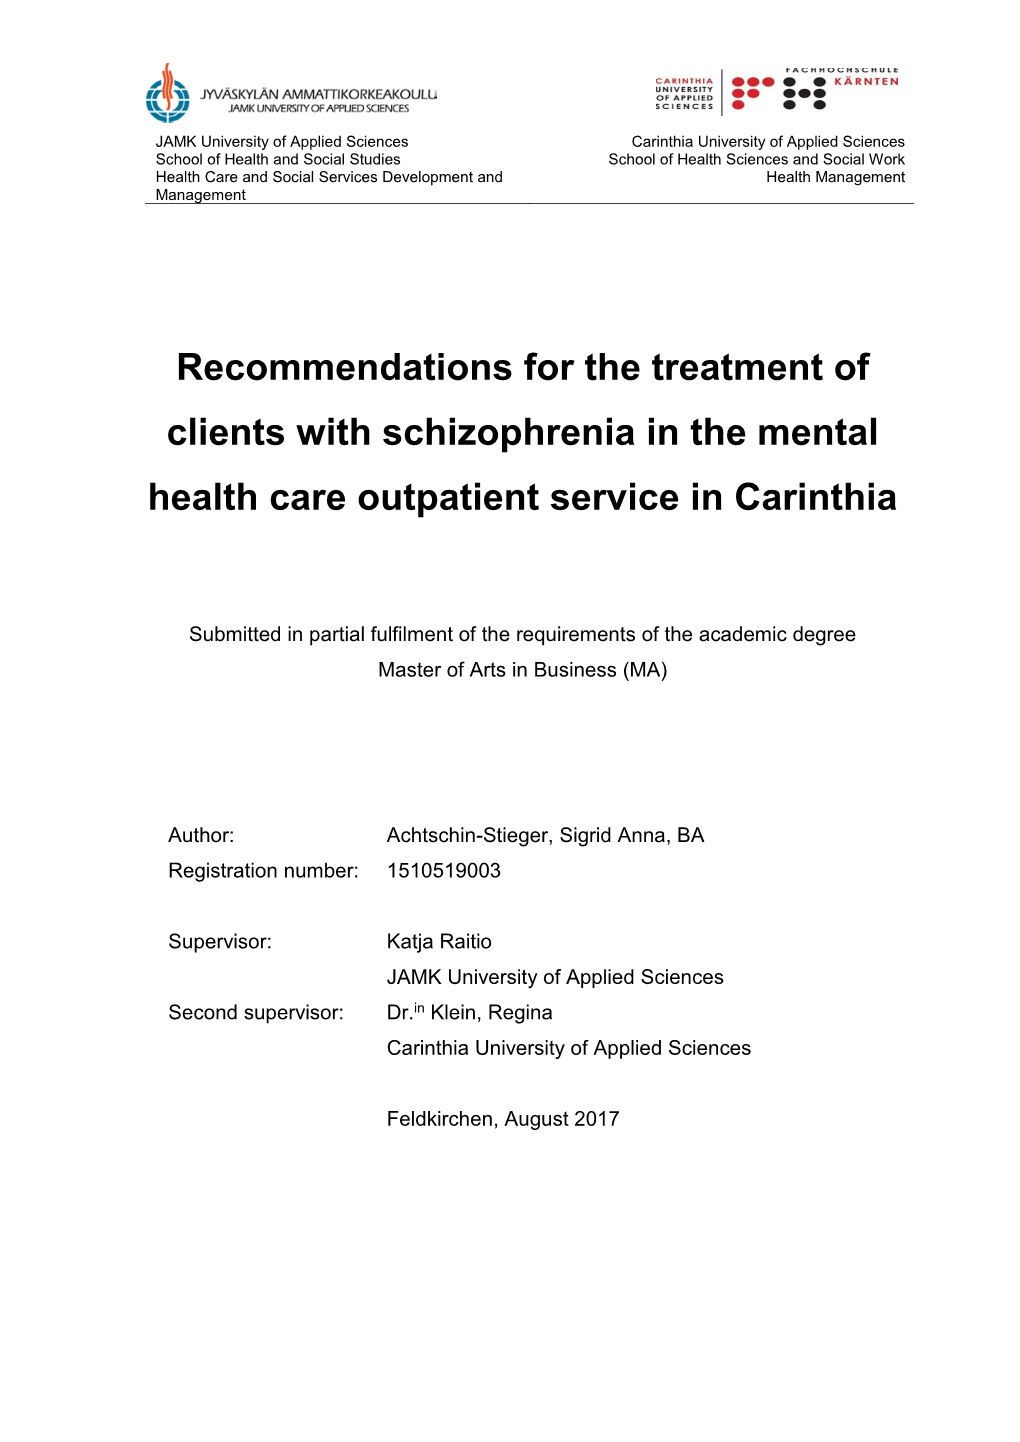 Recommendations for the Treatment of Clients with Schizophrenia in the Mental Health Care Outpatient Service in Carinthia